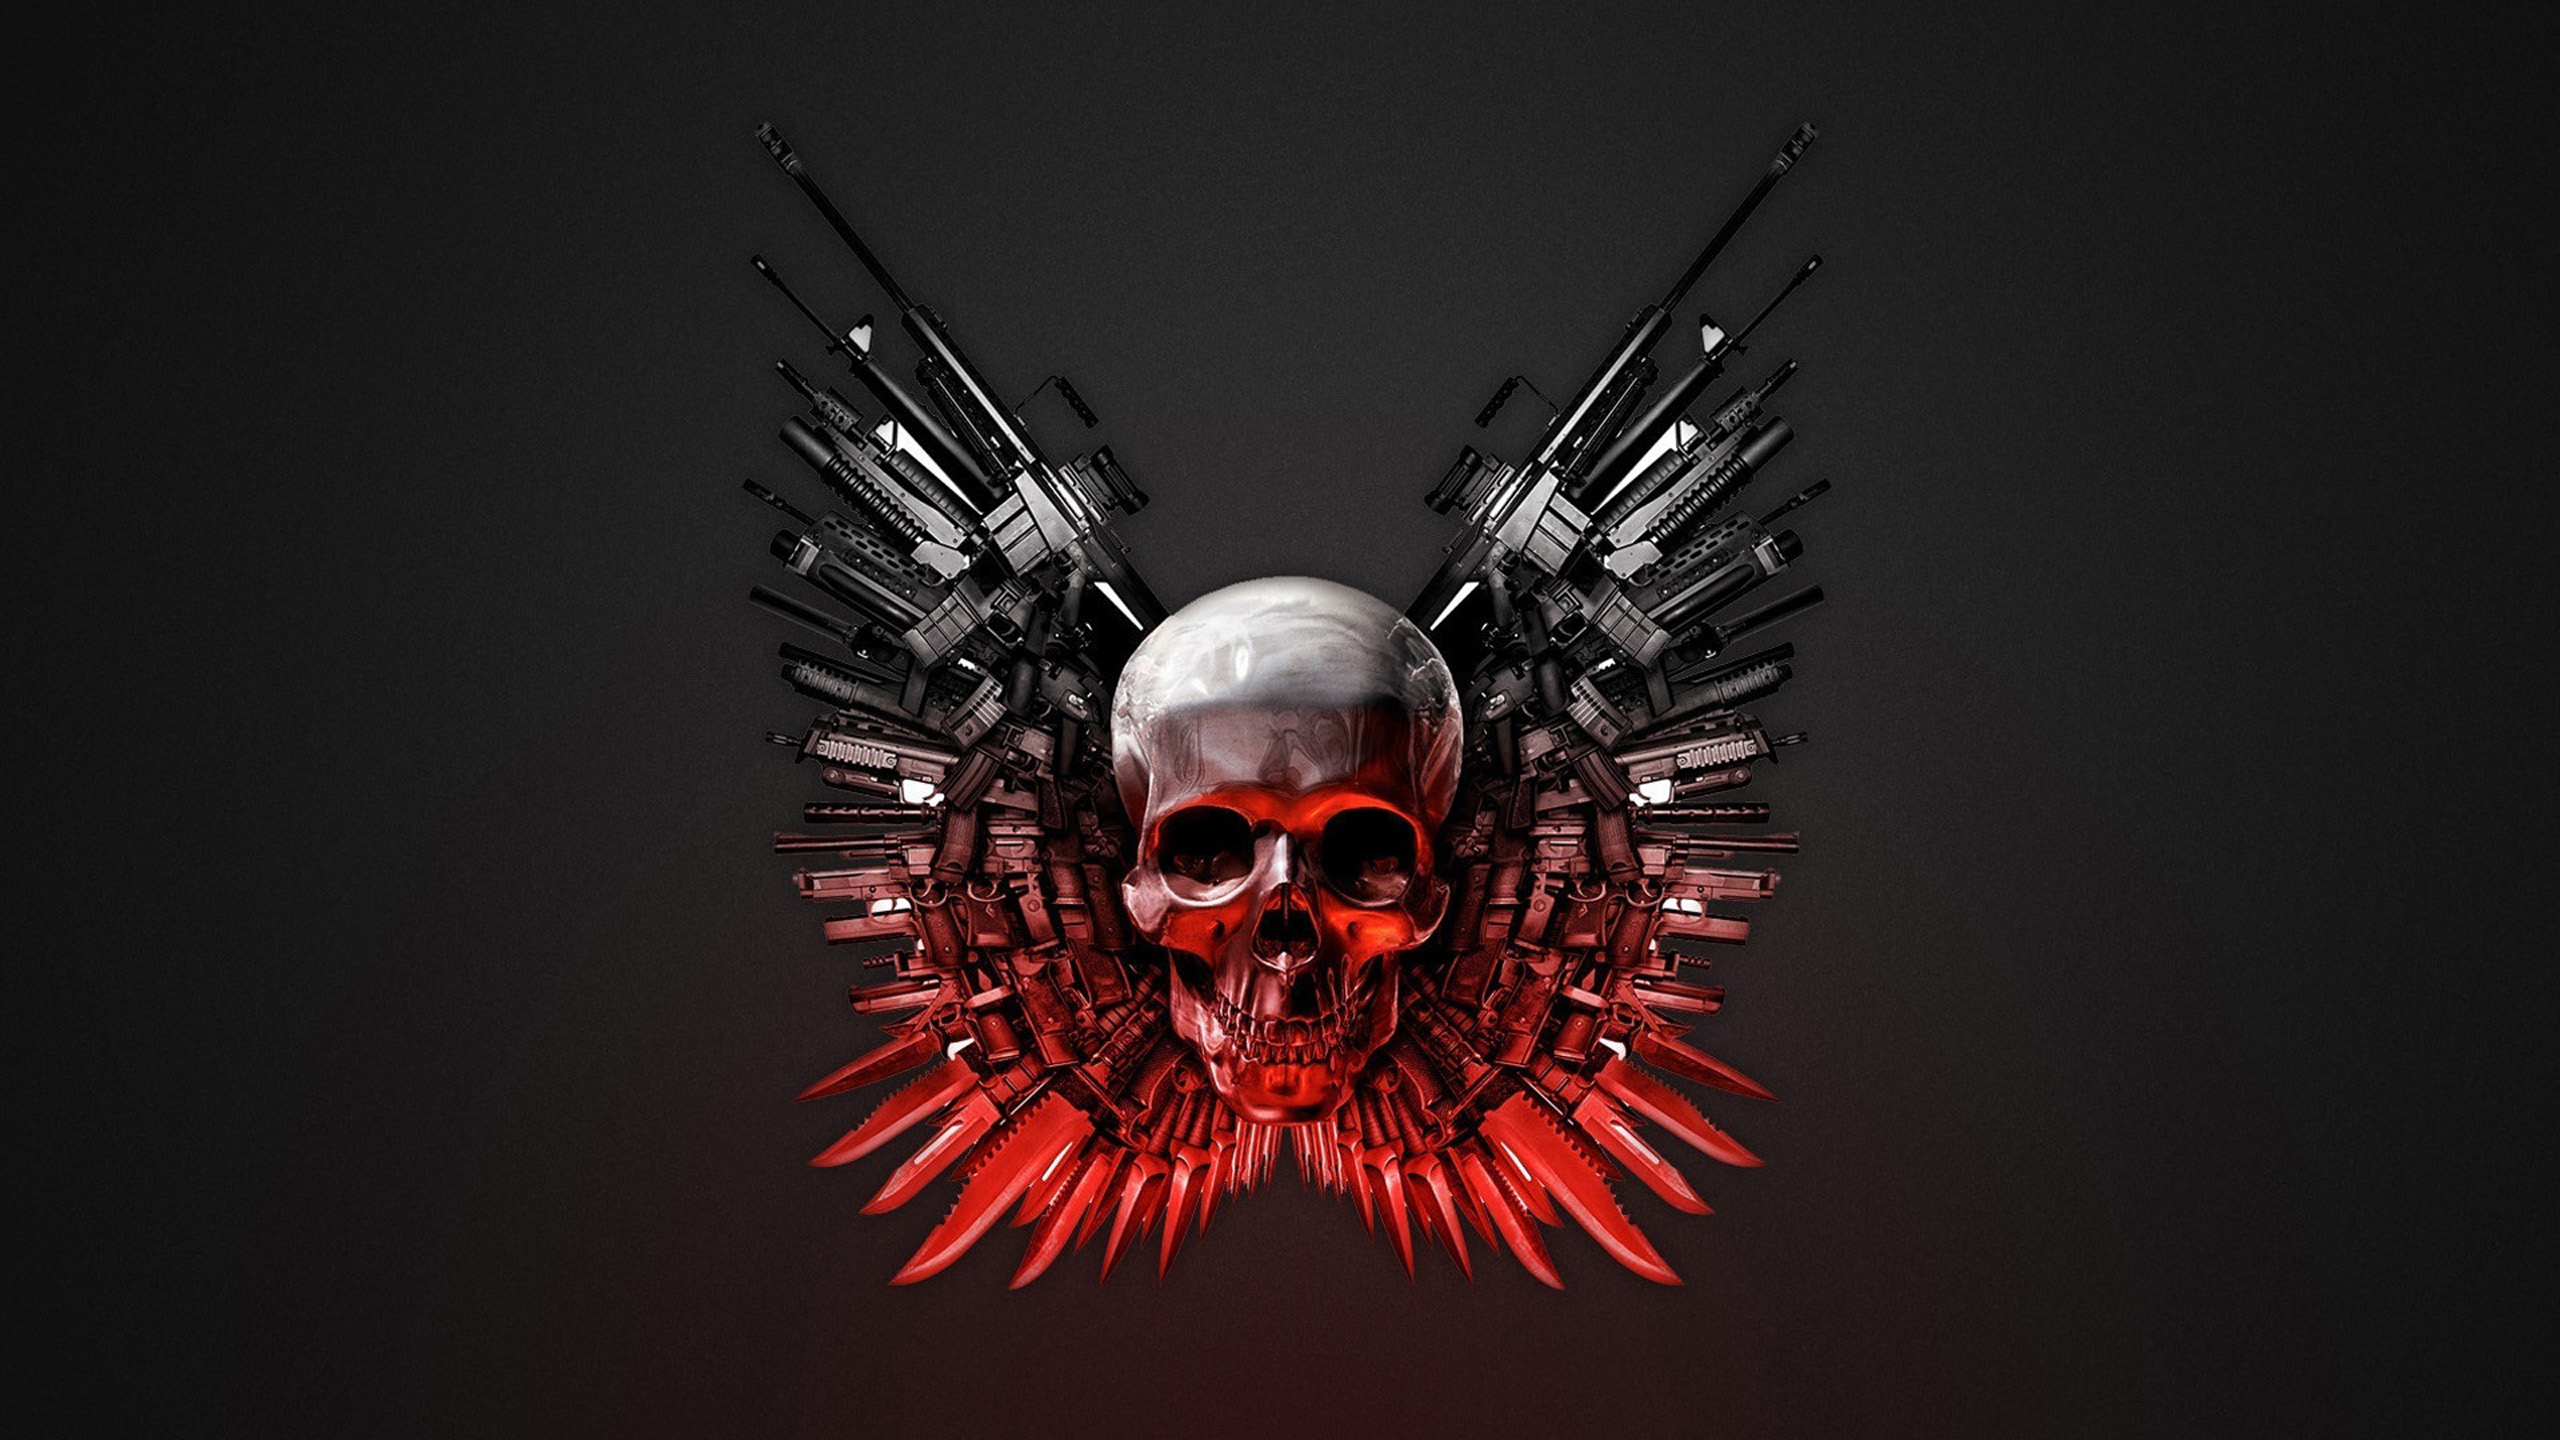 Red Black Skull 2603on High Quality - Expendables Skull - HD Wallpaper 